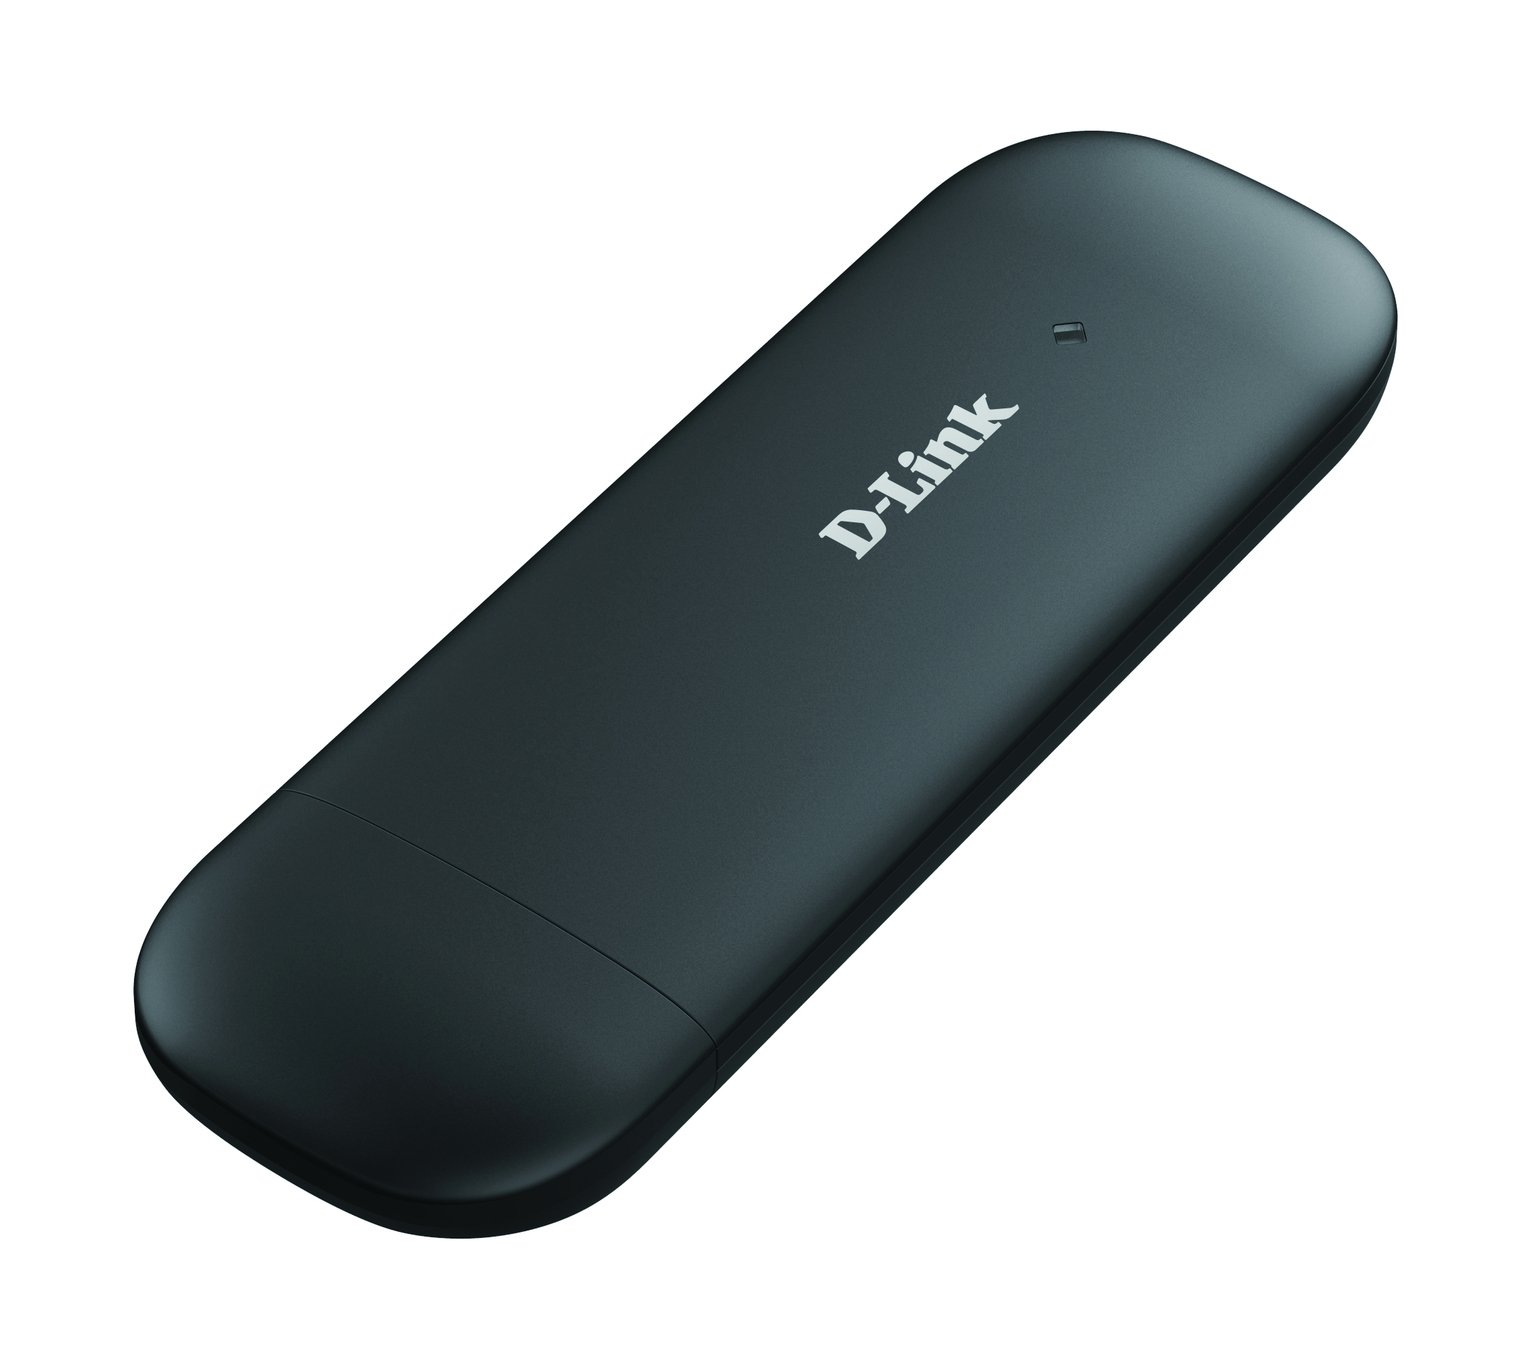 EE 4G 6GB Data Dongle Review